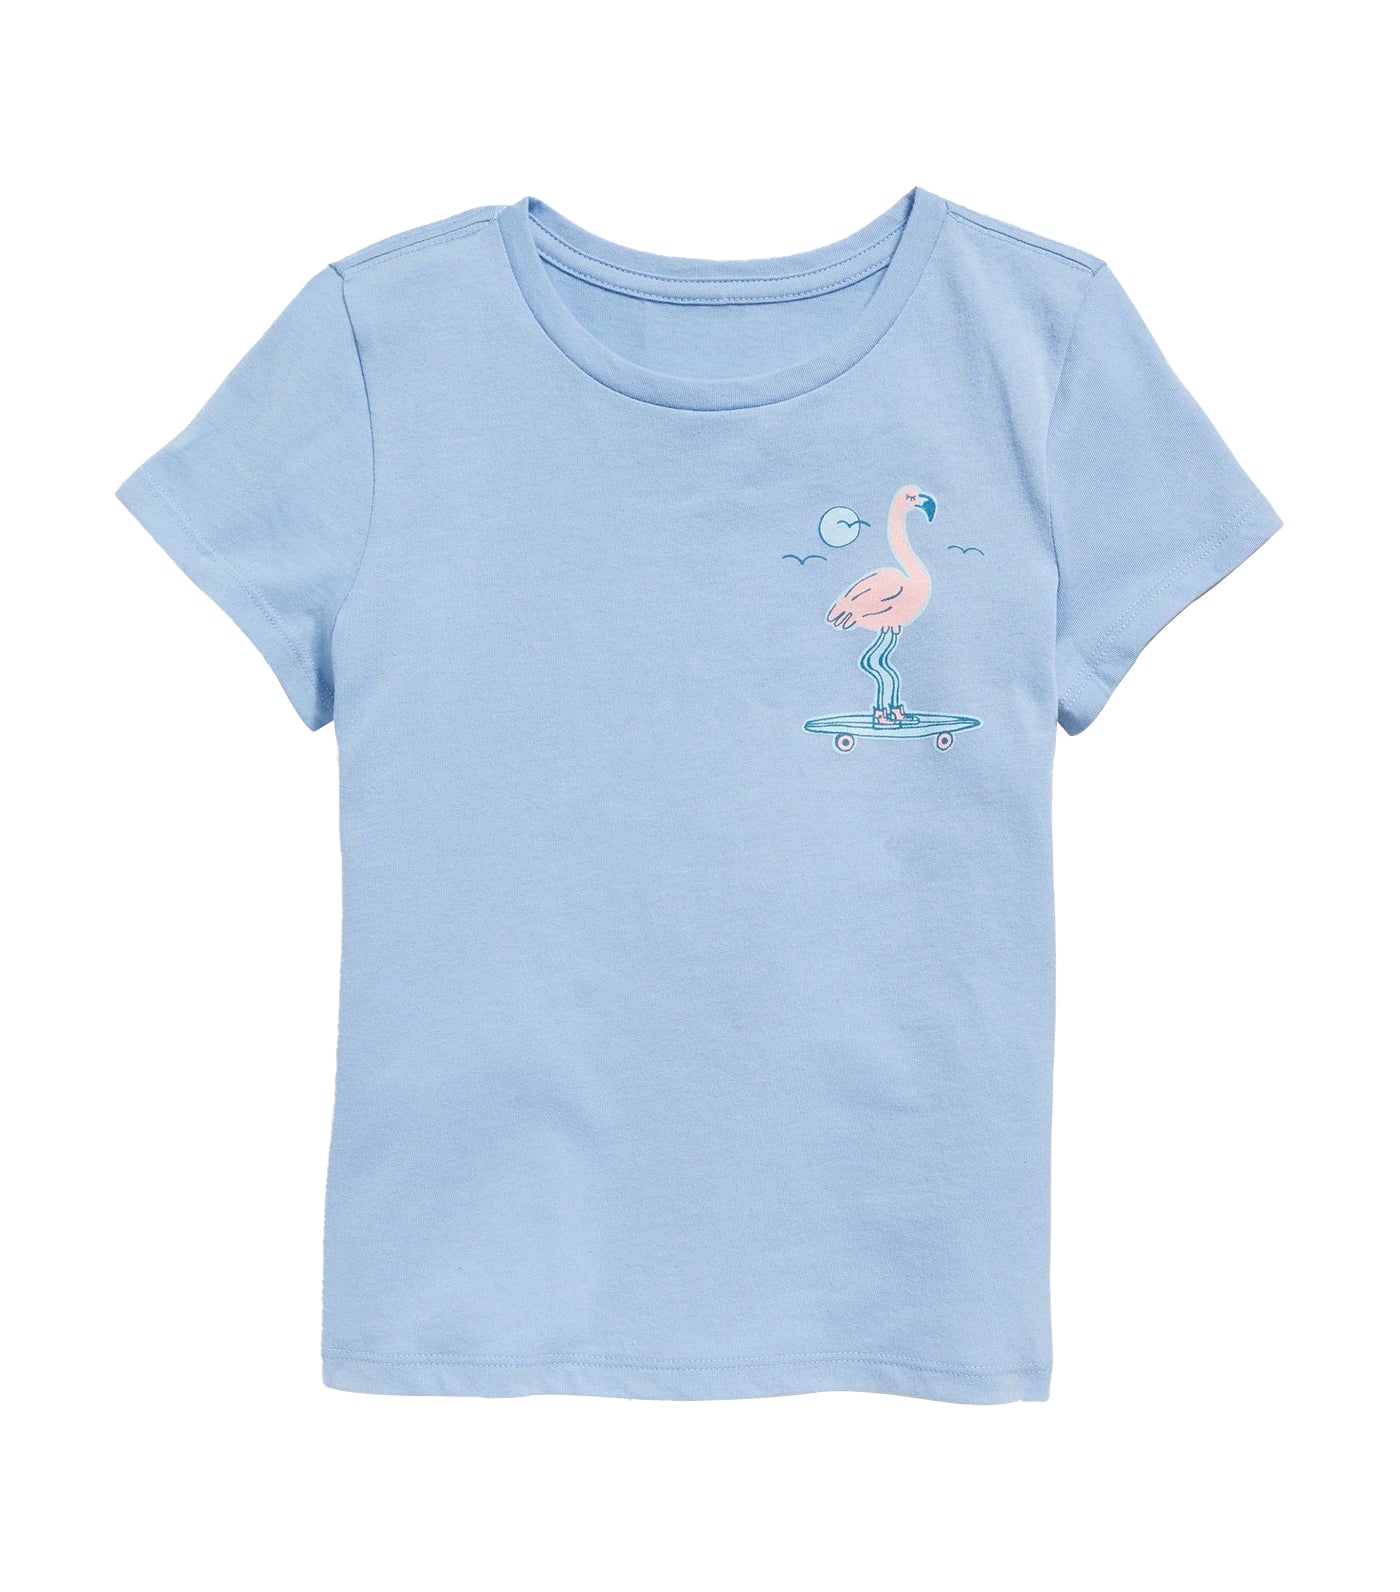 Short-Sleeve Graphic T-Shirt for Girls Blue Overall